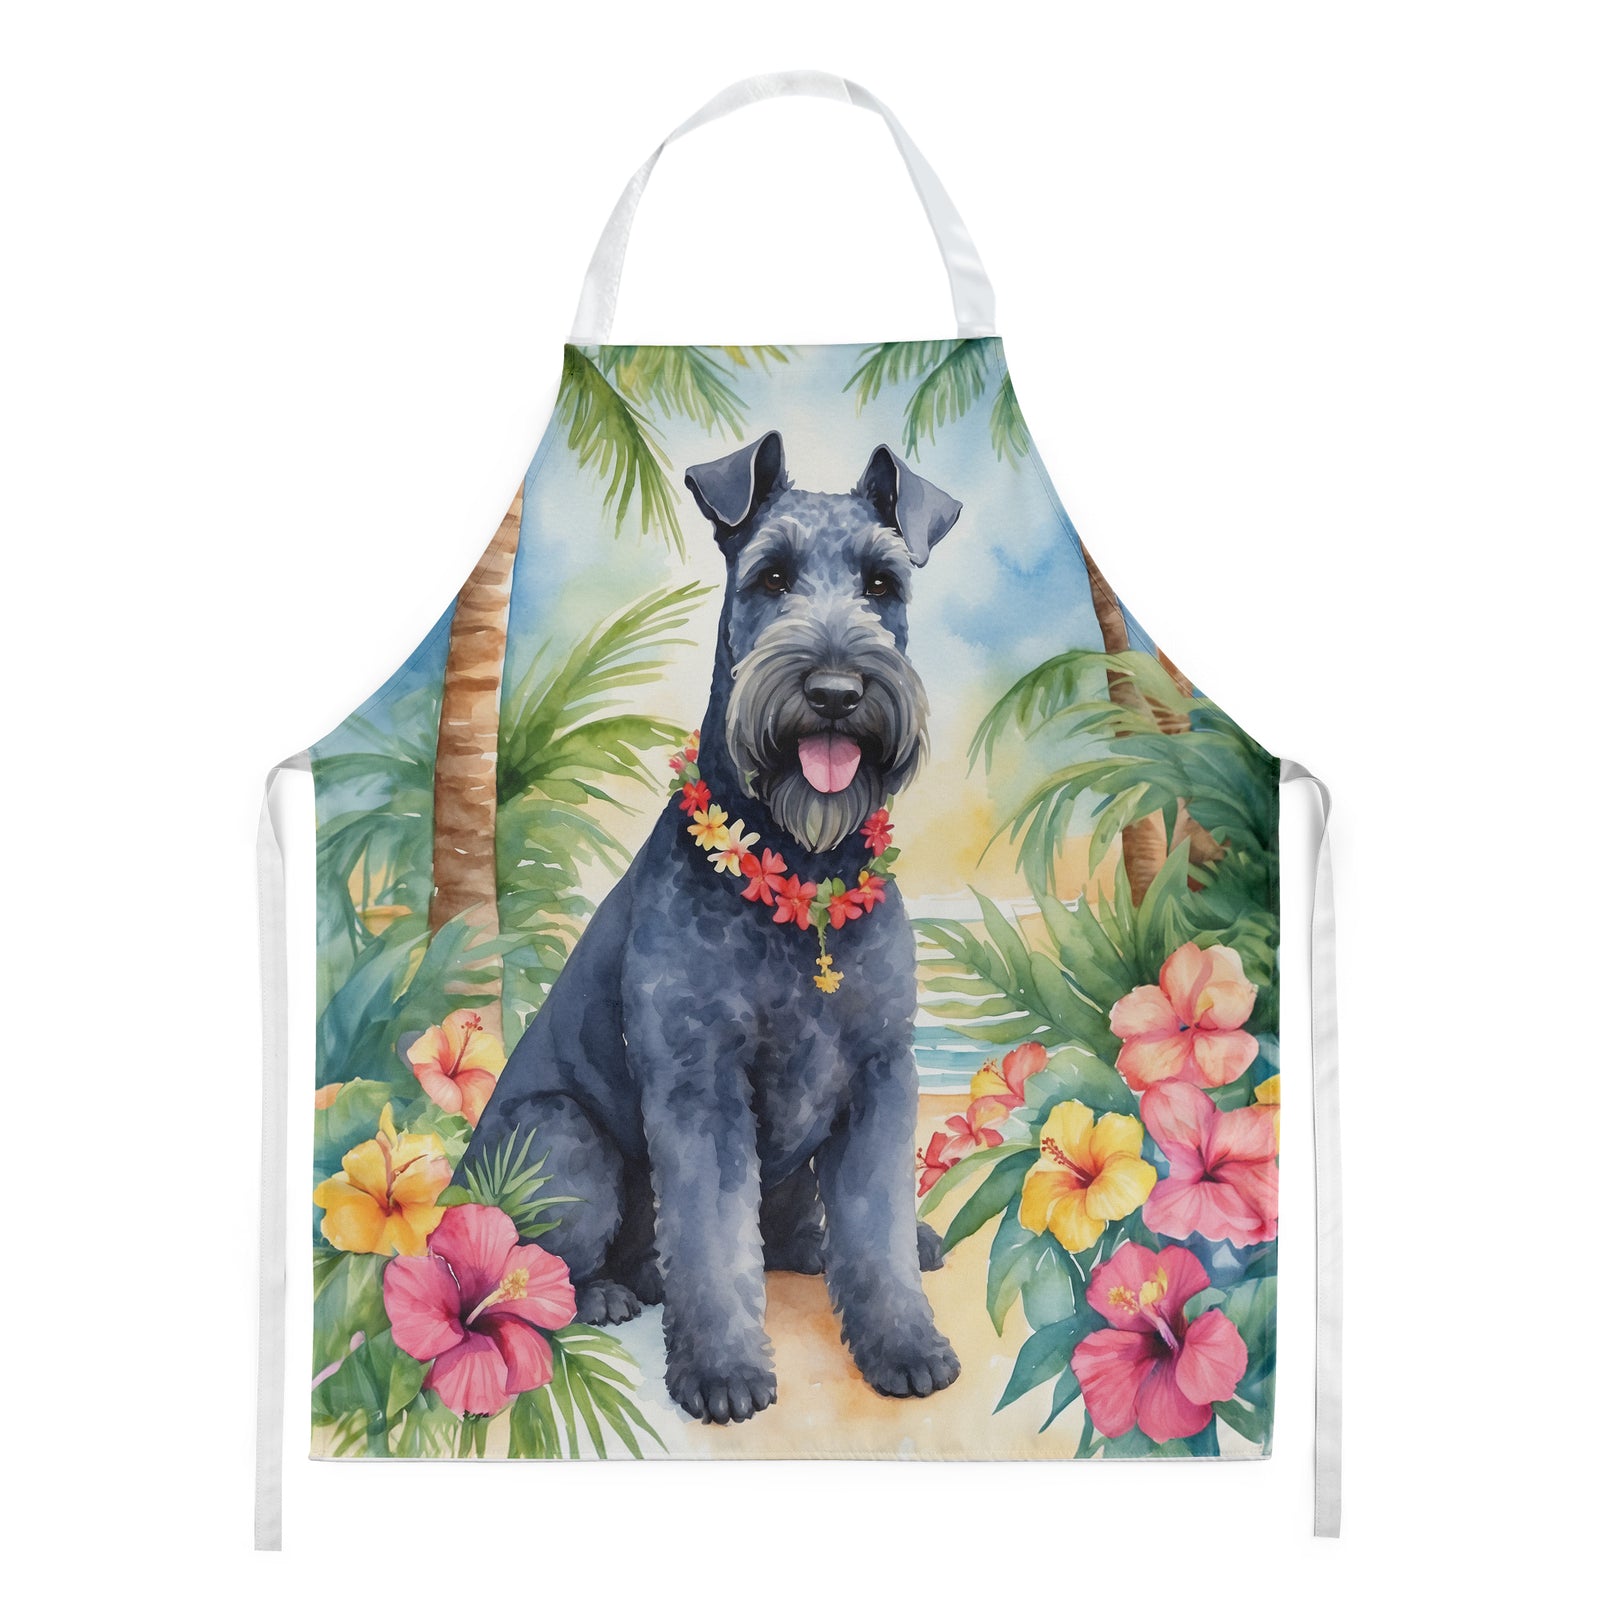 Buy this Kerry Blue Terrier Luau Apron